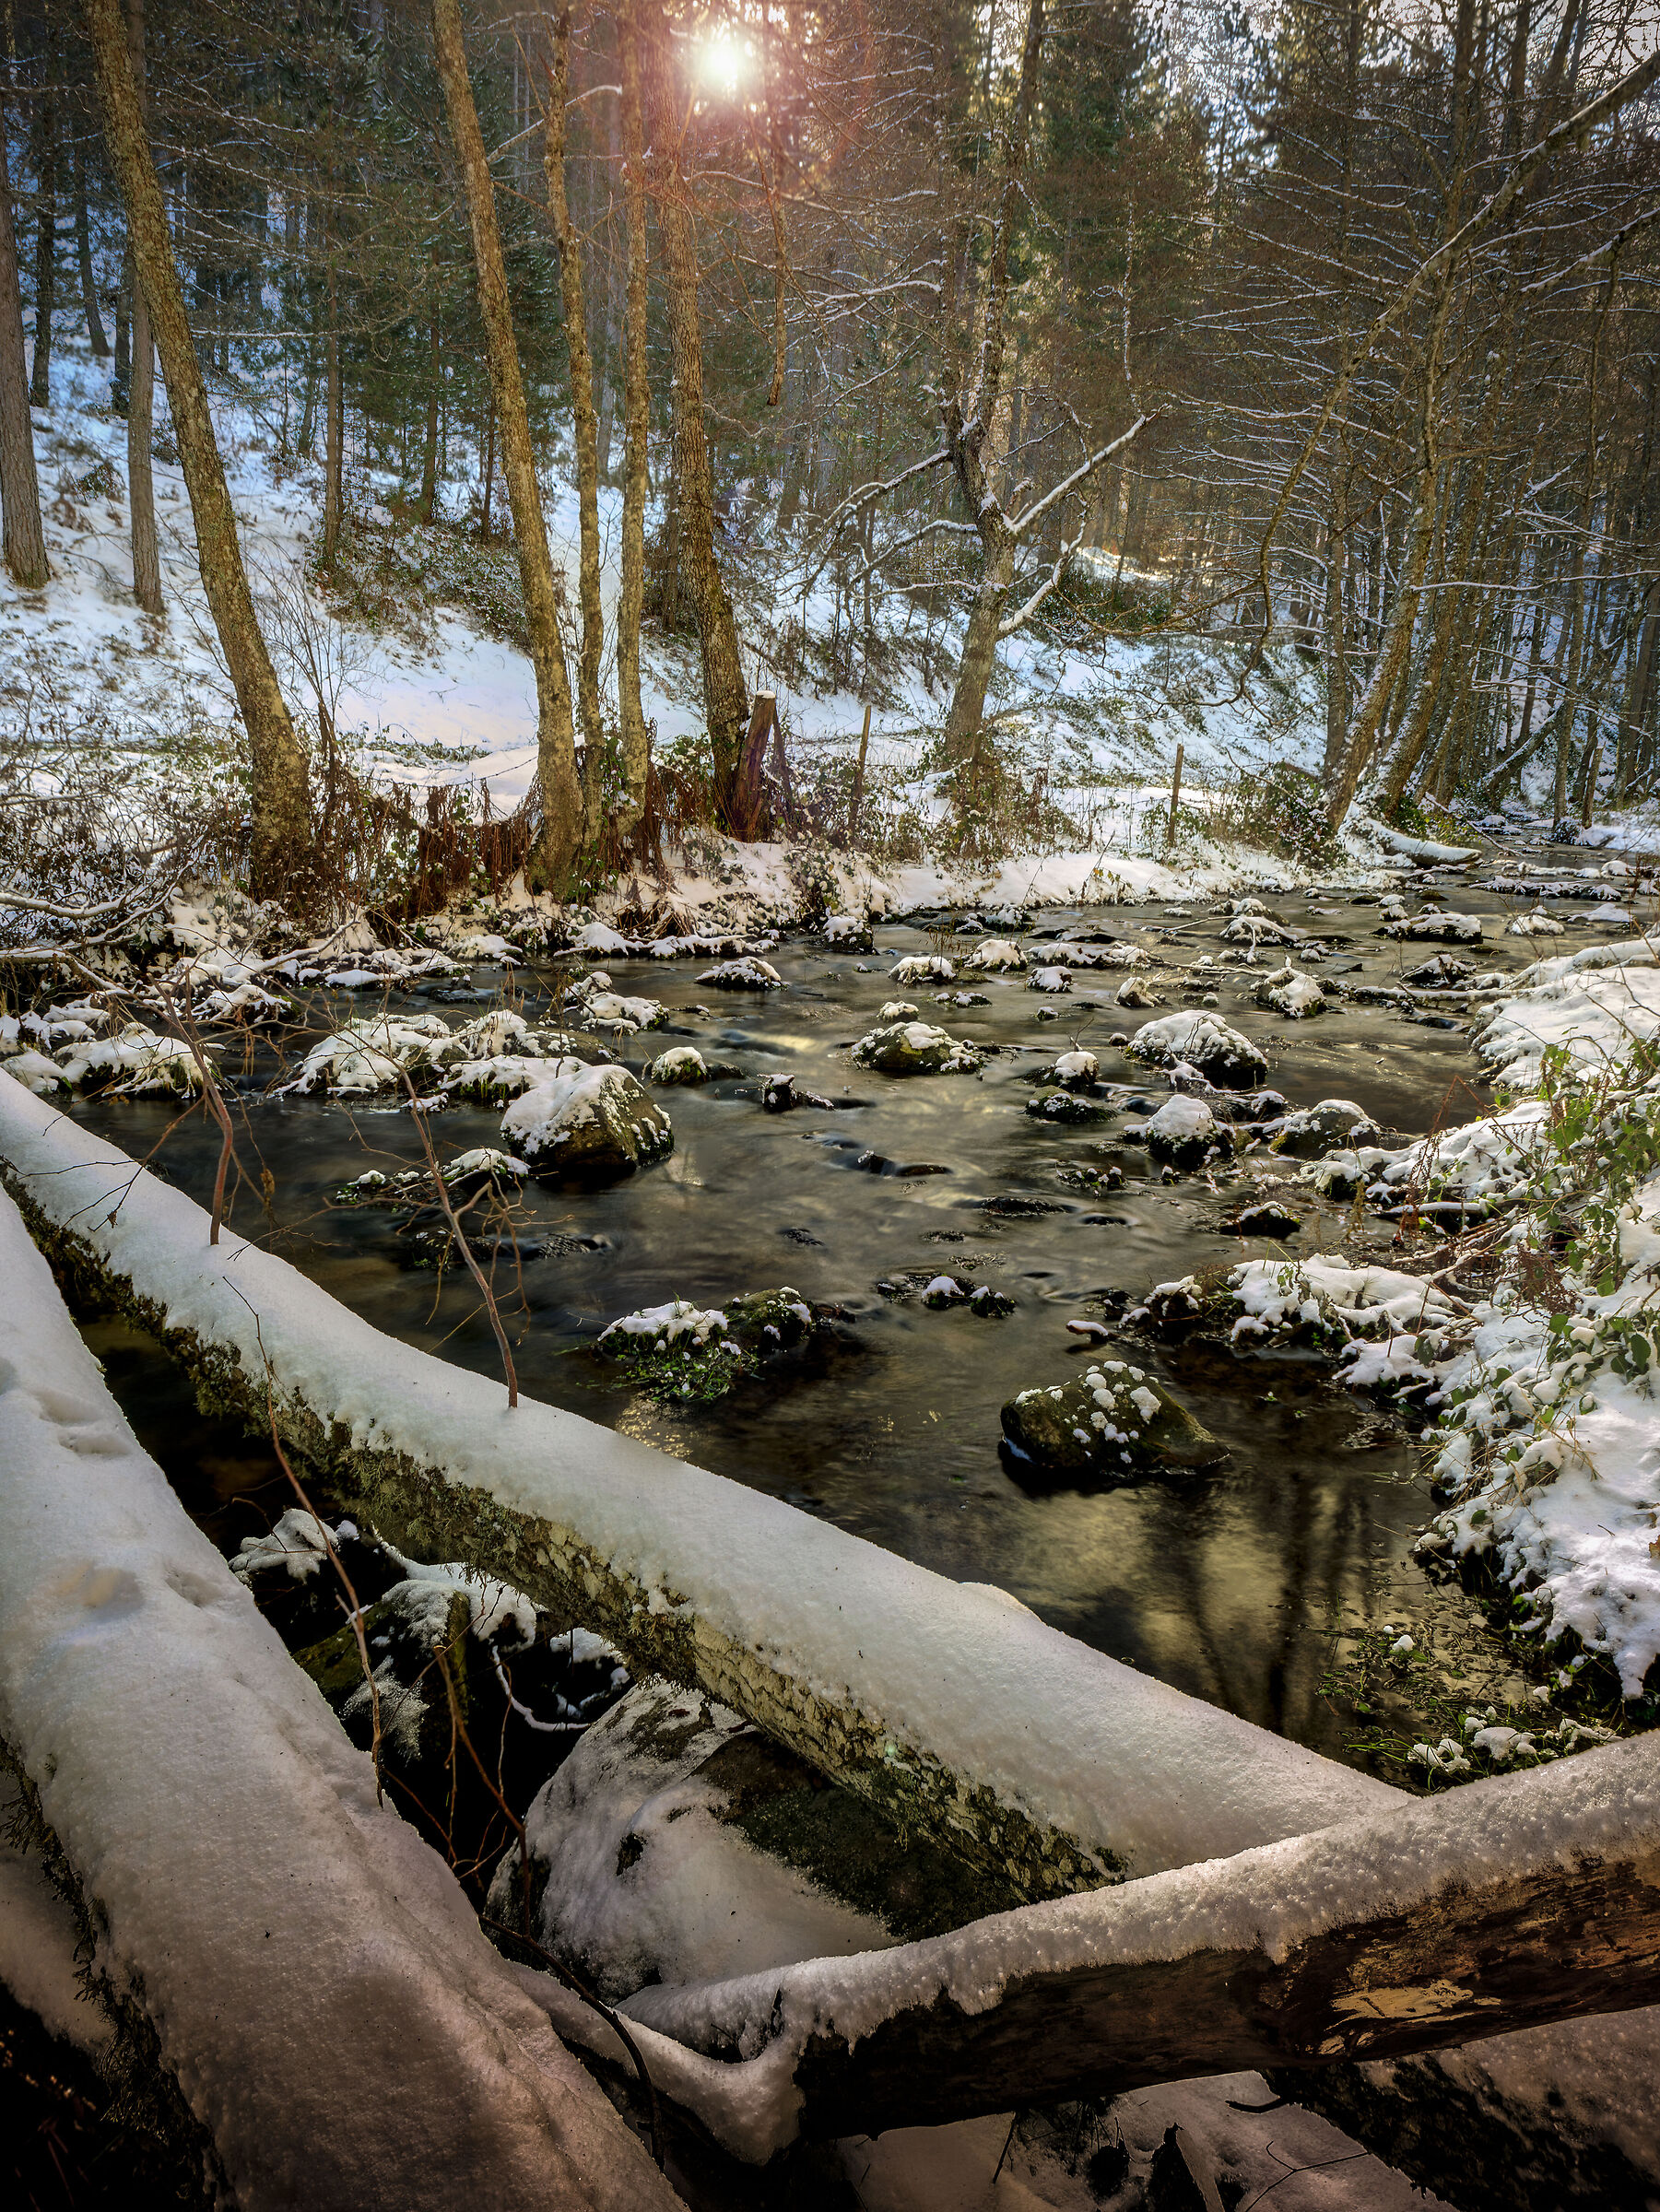 That icy stream...